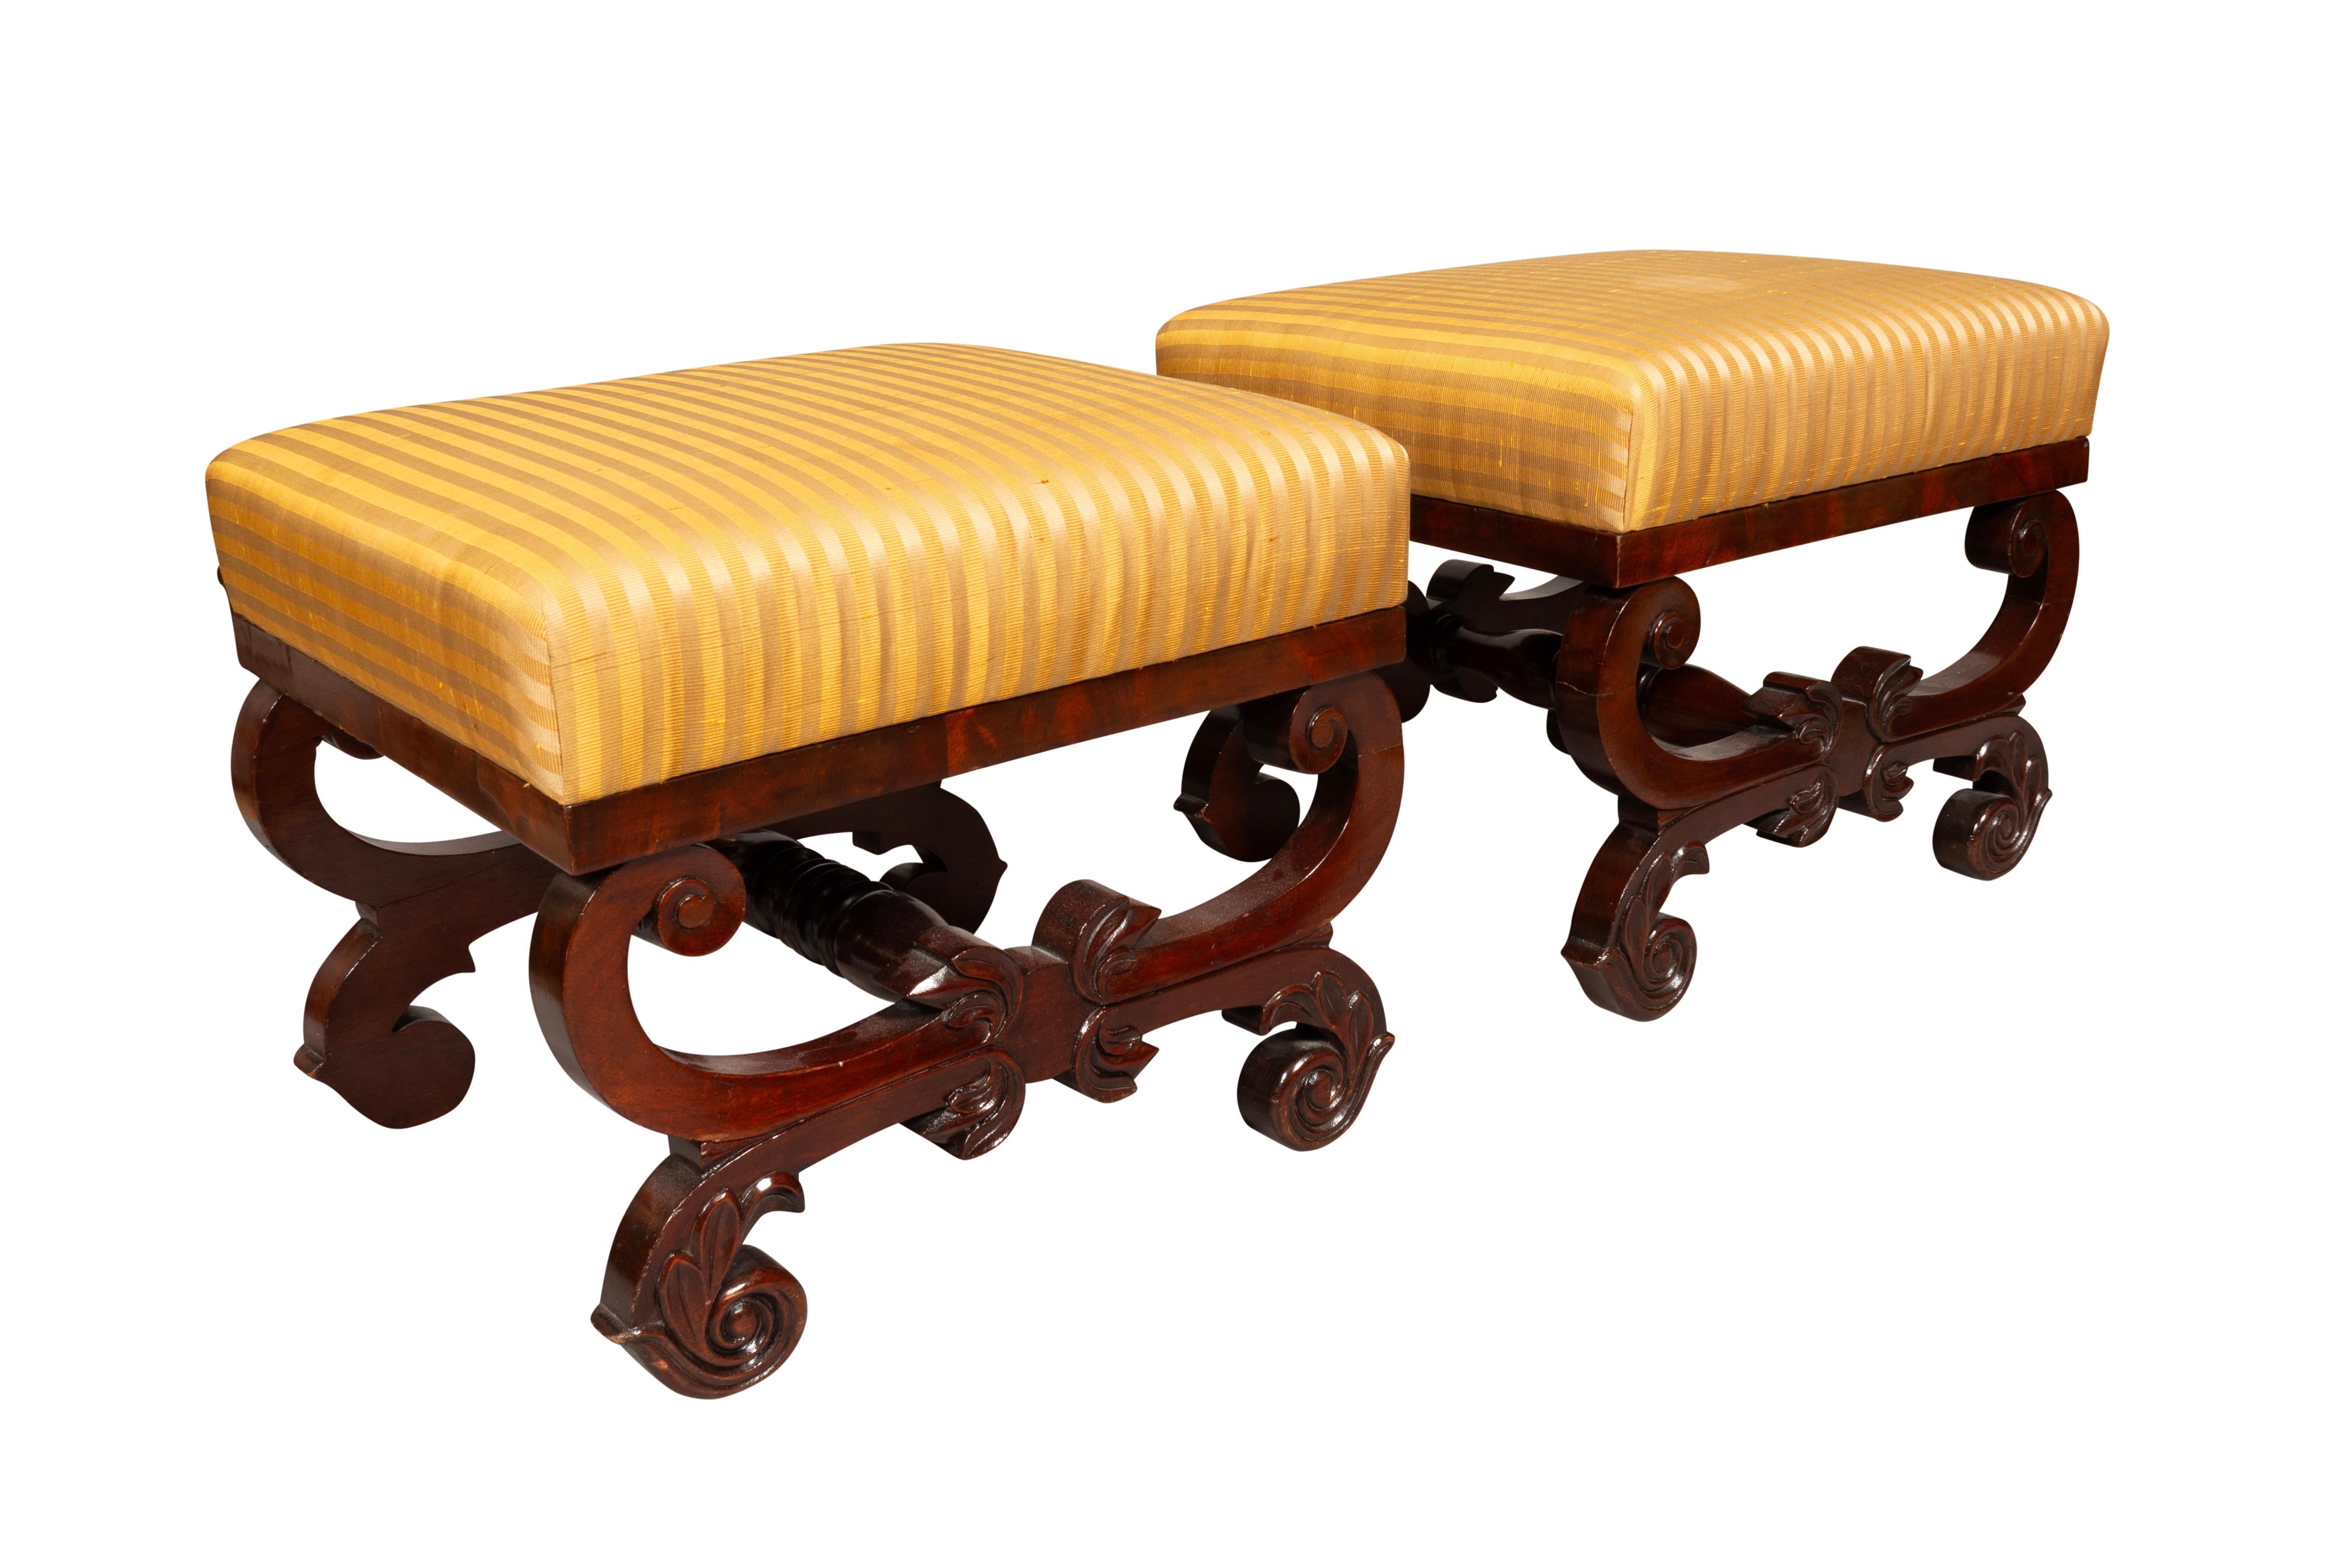 Rectangular upholstered seat raised on a reverse scroll carved base. Both sides finished.